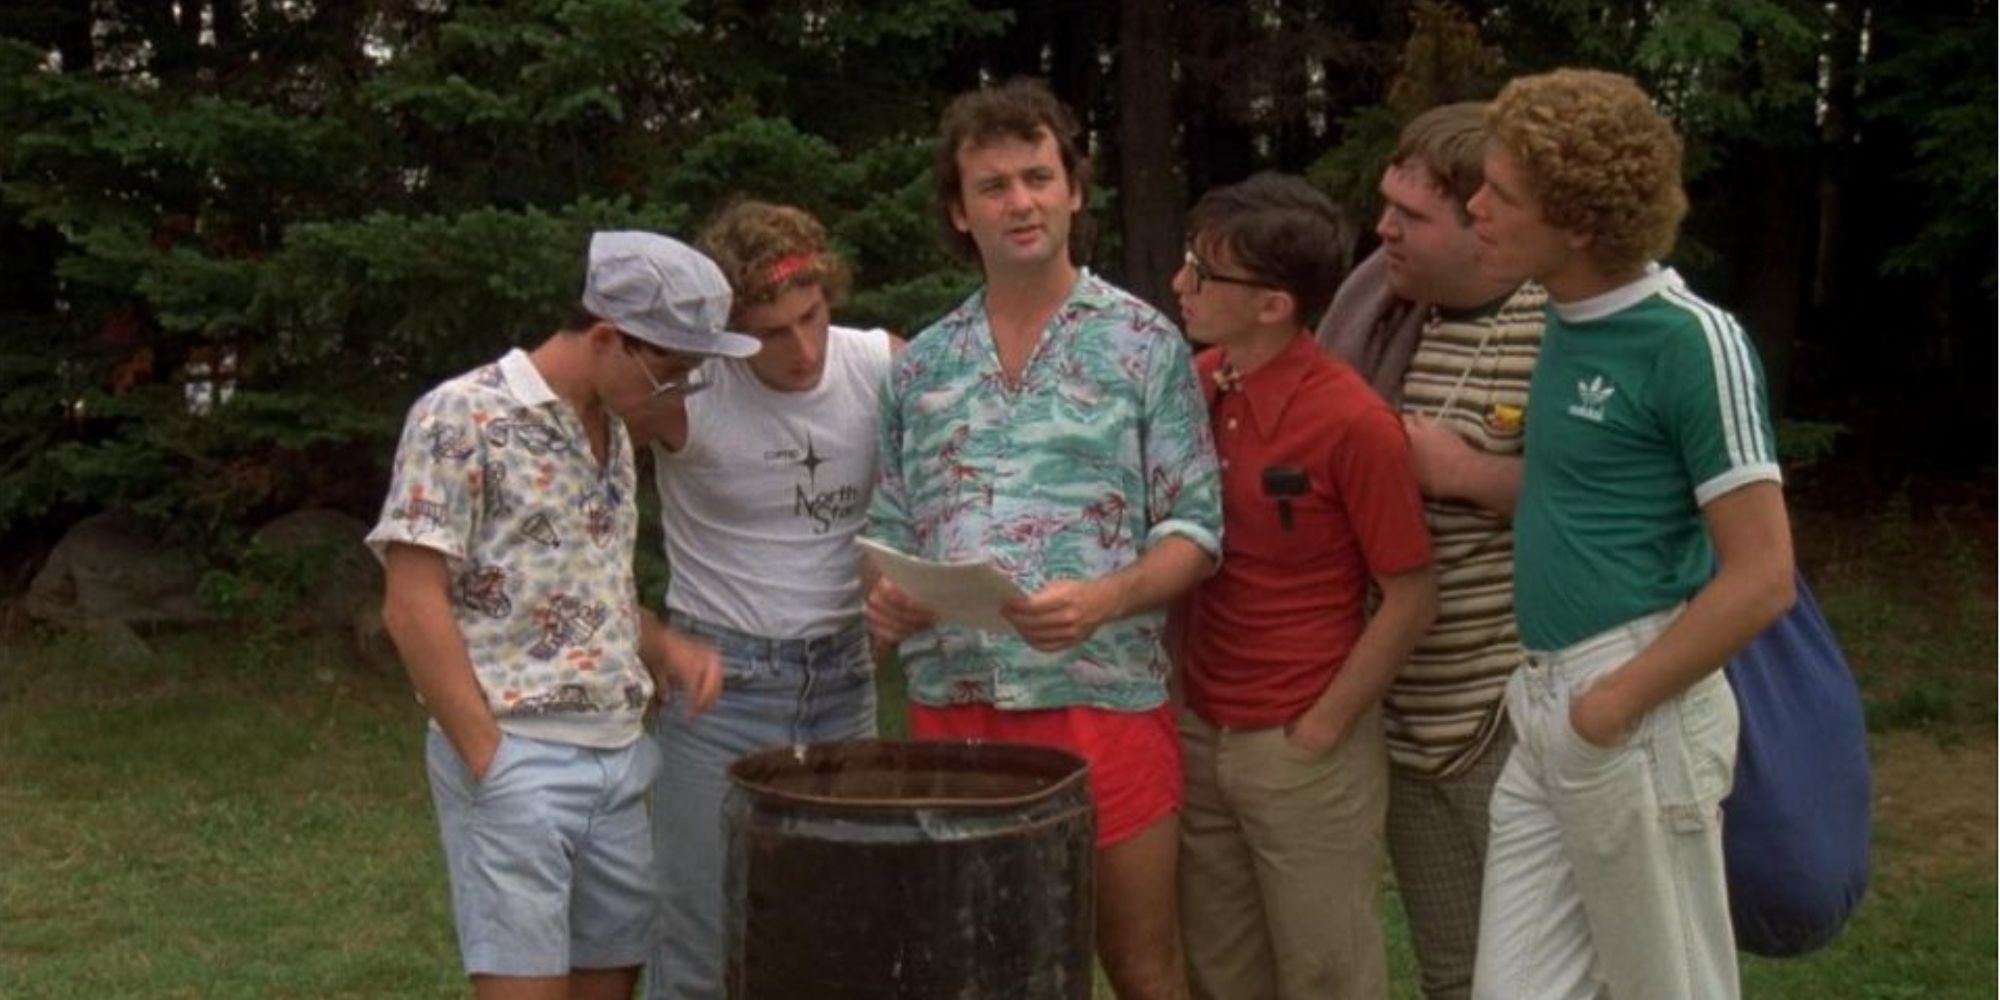 Bill Murray and Co. at Camp North Star in Meatballs